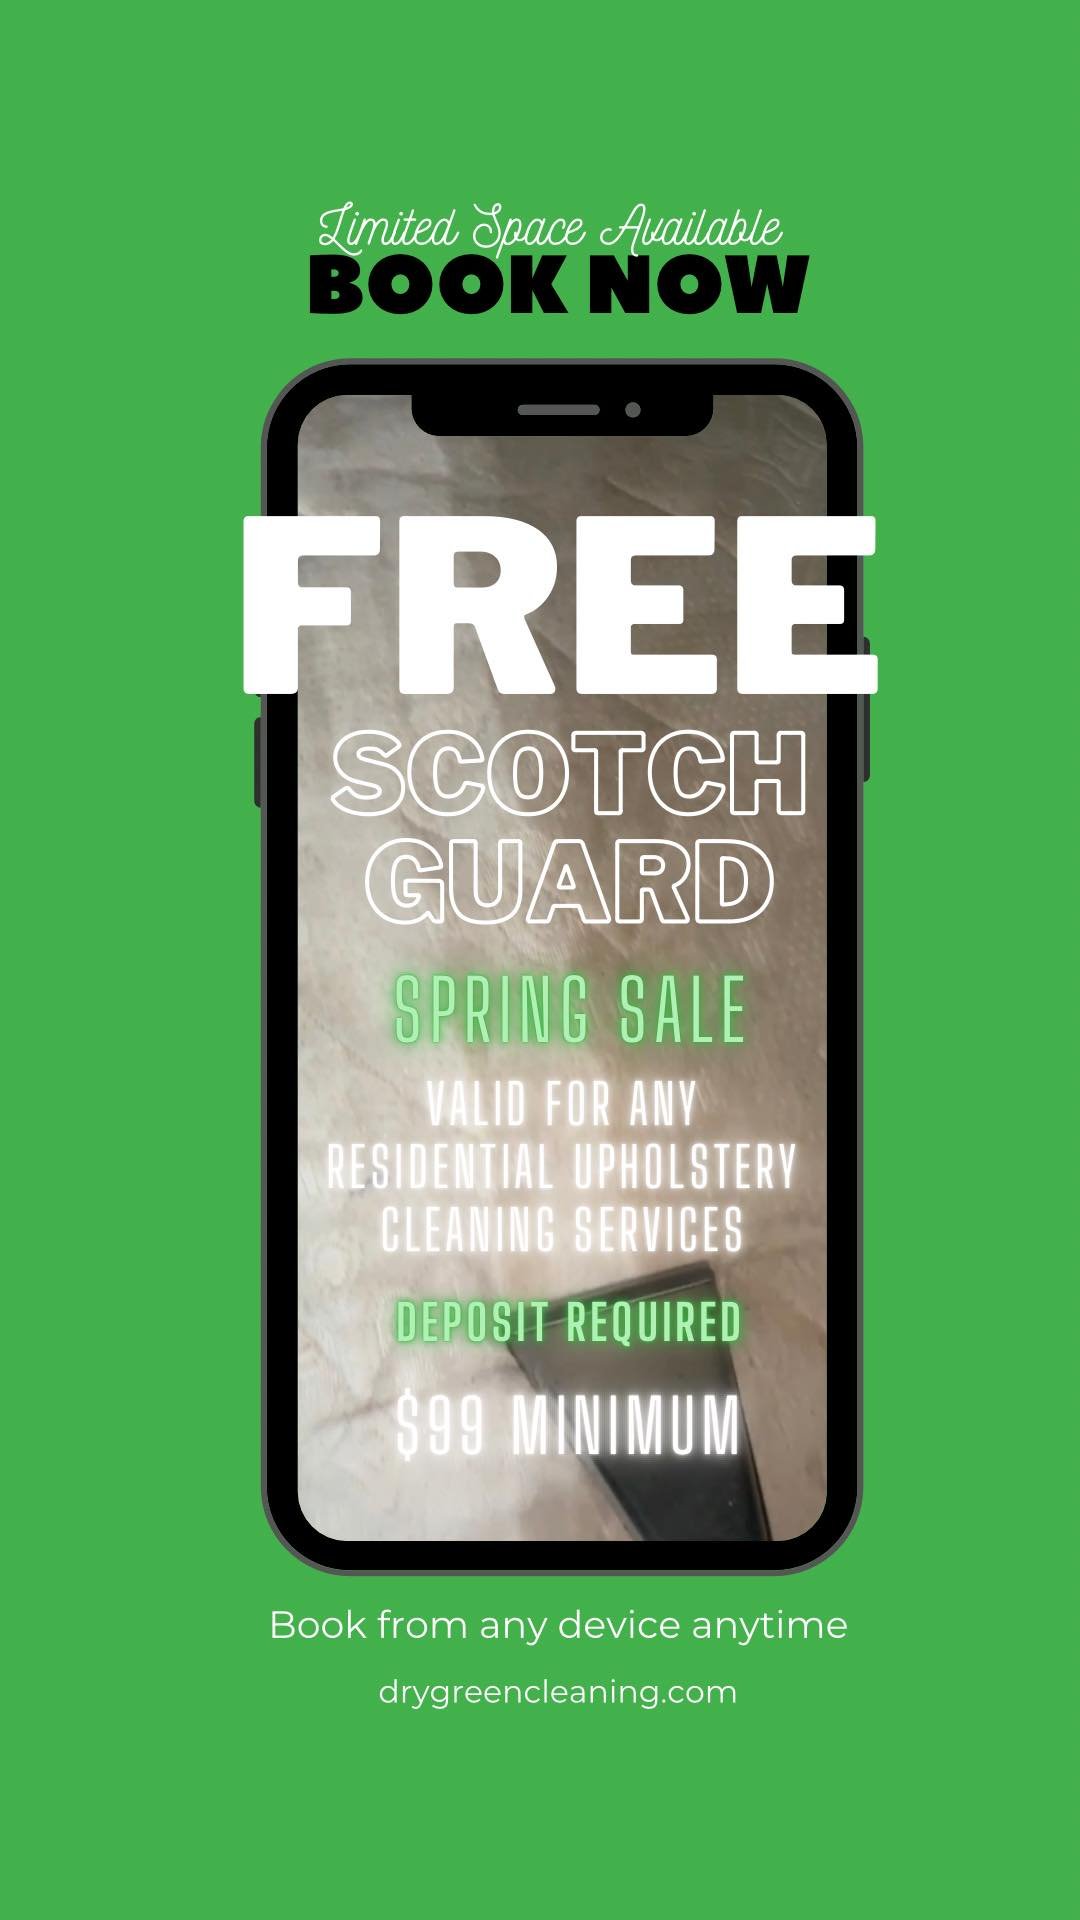 FREE SCOTCH GUARD W/ UPHOLSTERY CLEANING! — Dry Green Cleaning LLC - Carpet  Cleaning - United States - Detroit, Michigan